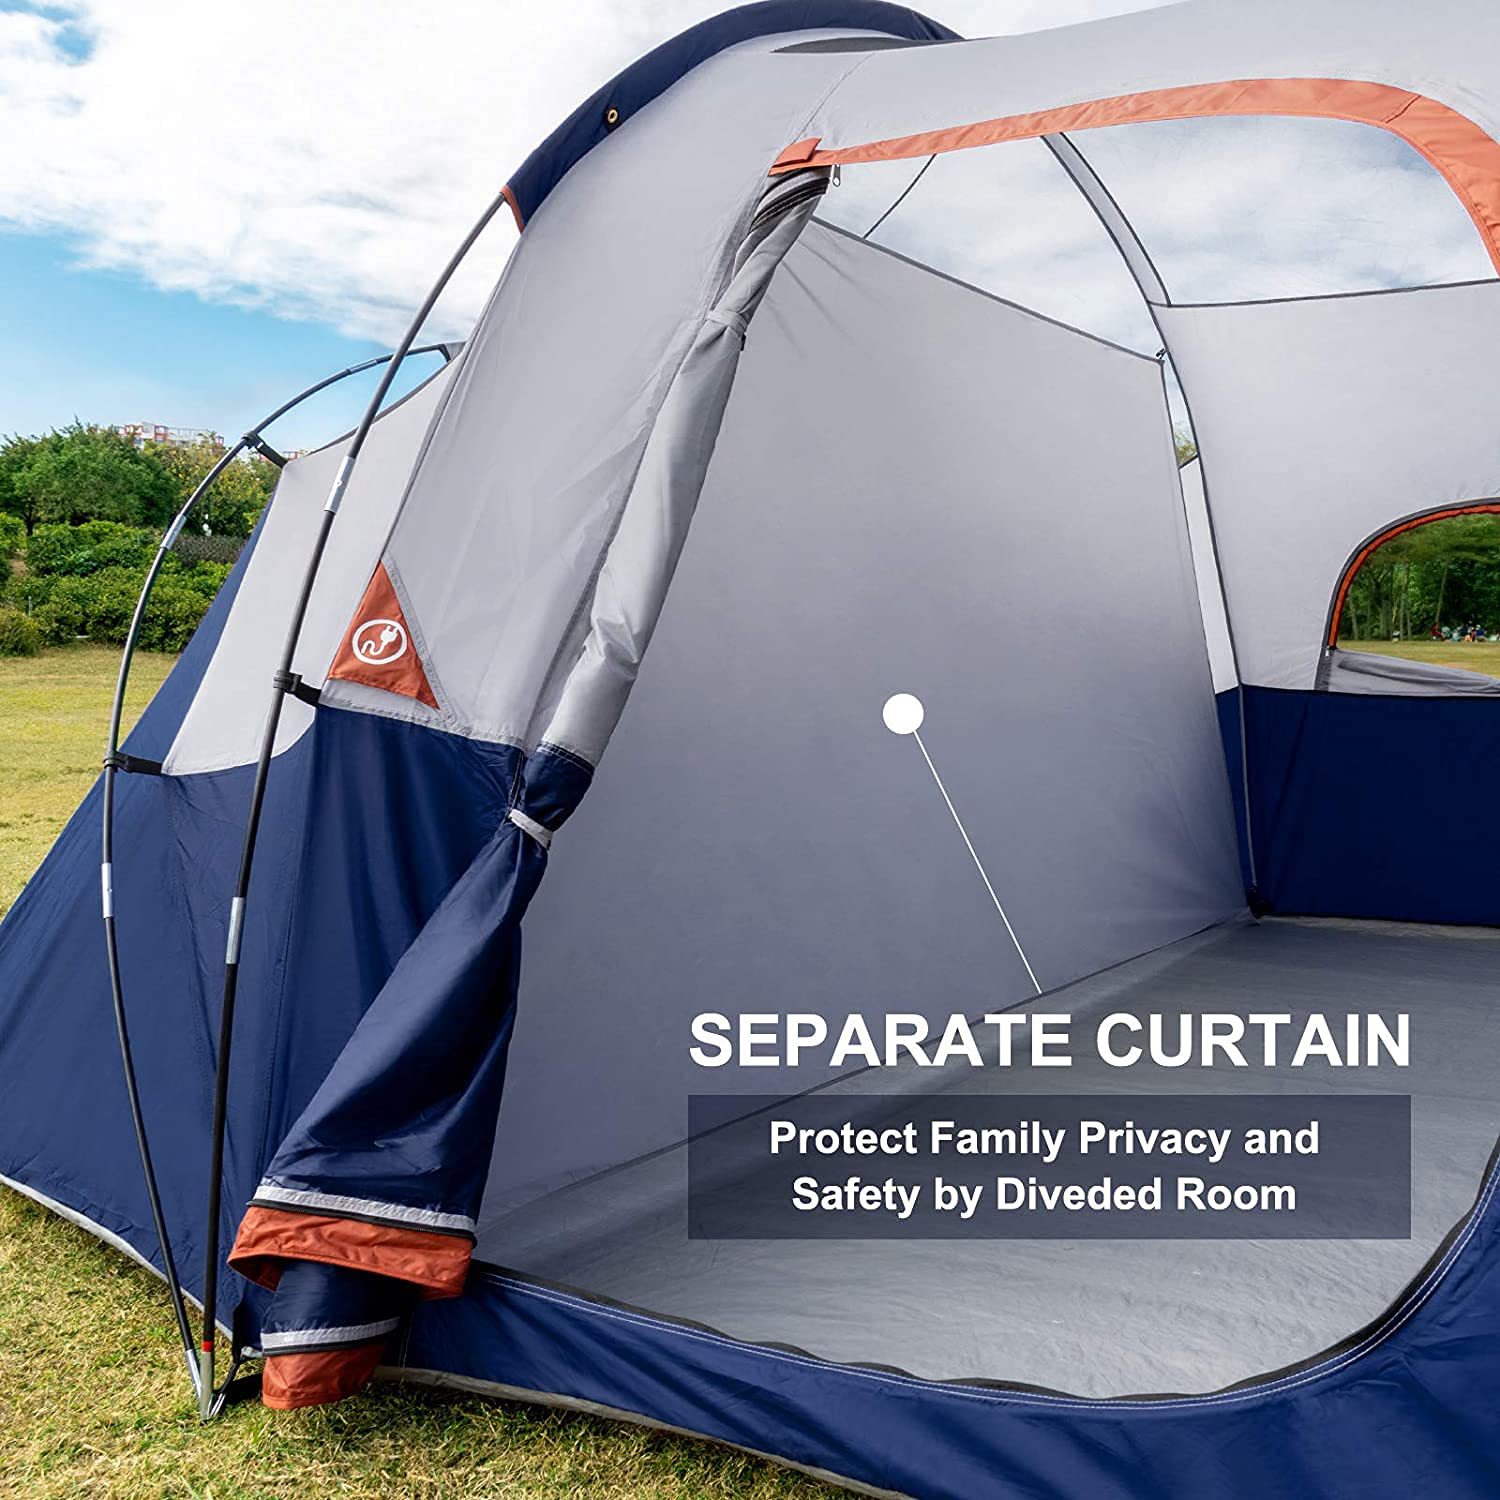 Tent-8-Person-Camping-Tents, Waterproof Windproof Family Tent, 5 Large Mesh Windows, Double Layer, Divided Curtain for Separated Room, Portable with Carry Bag